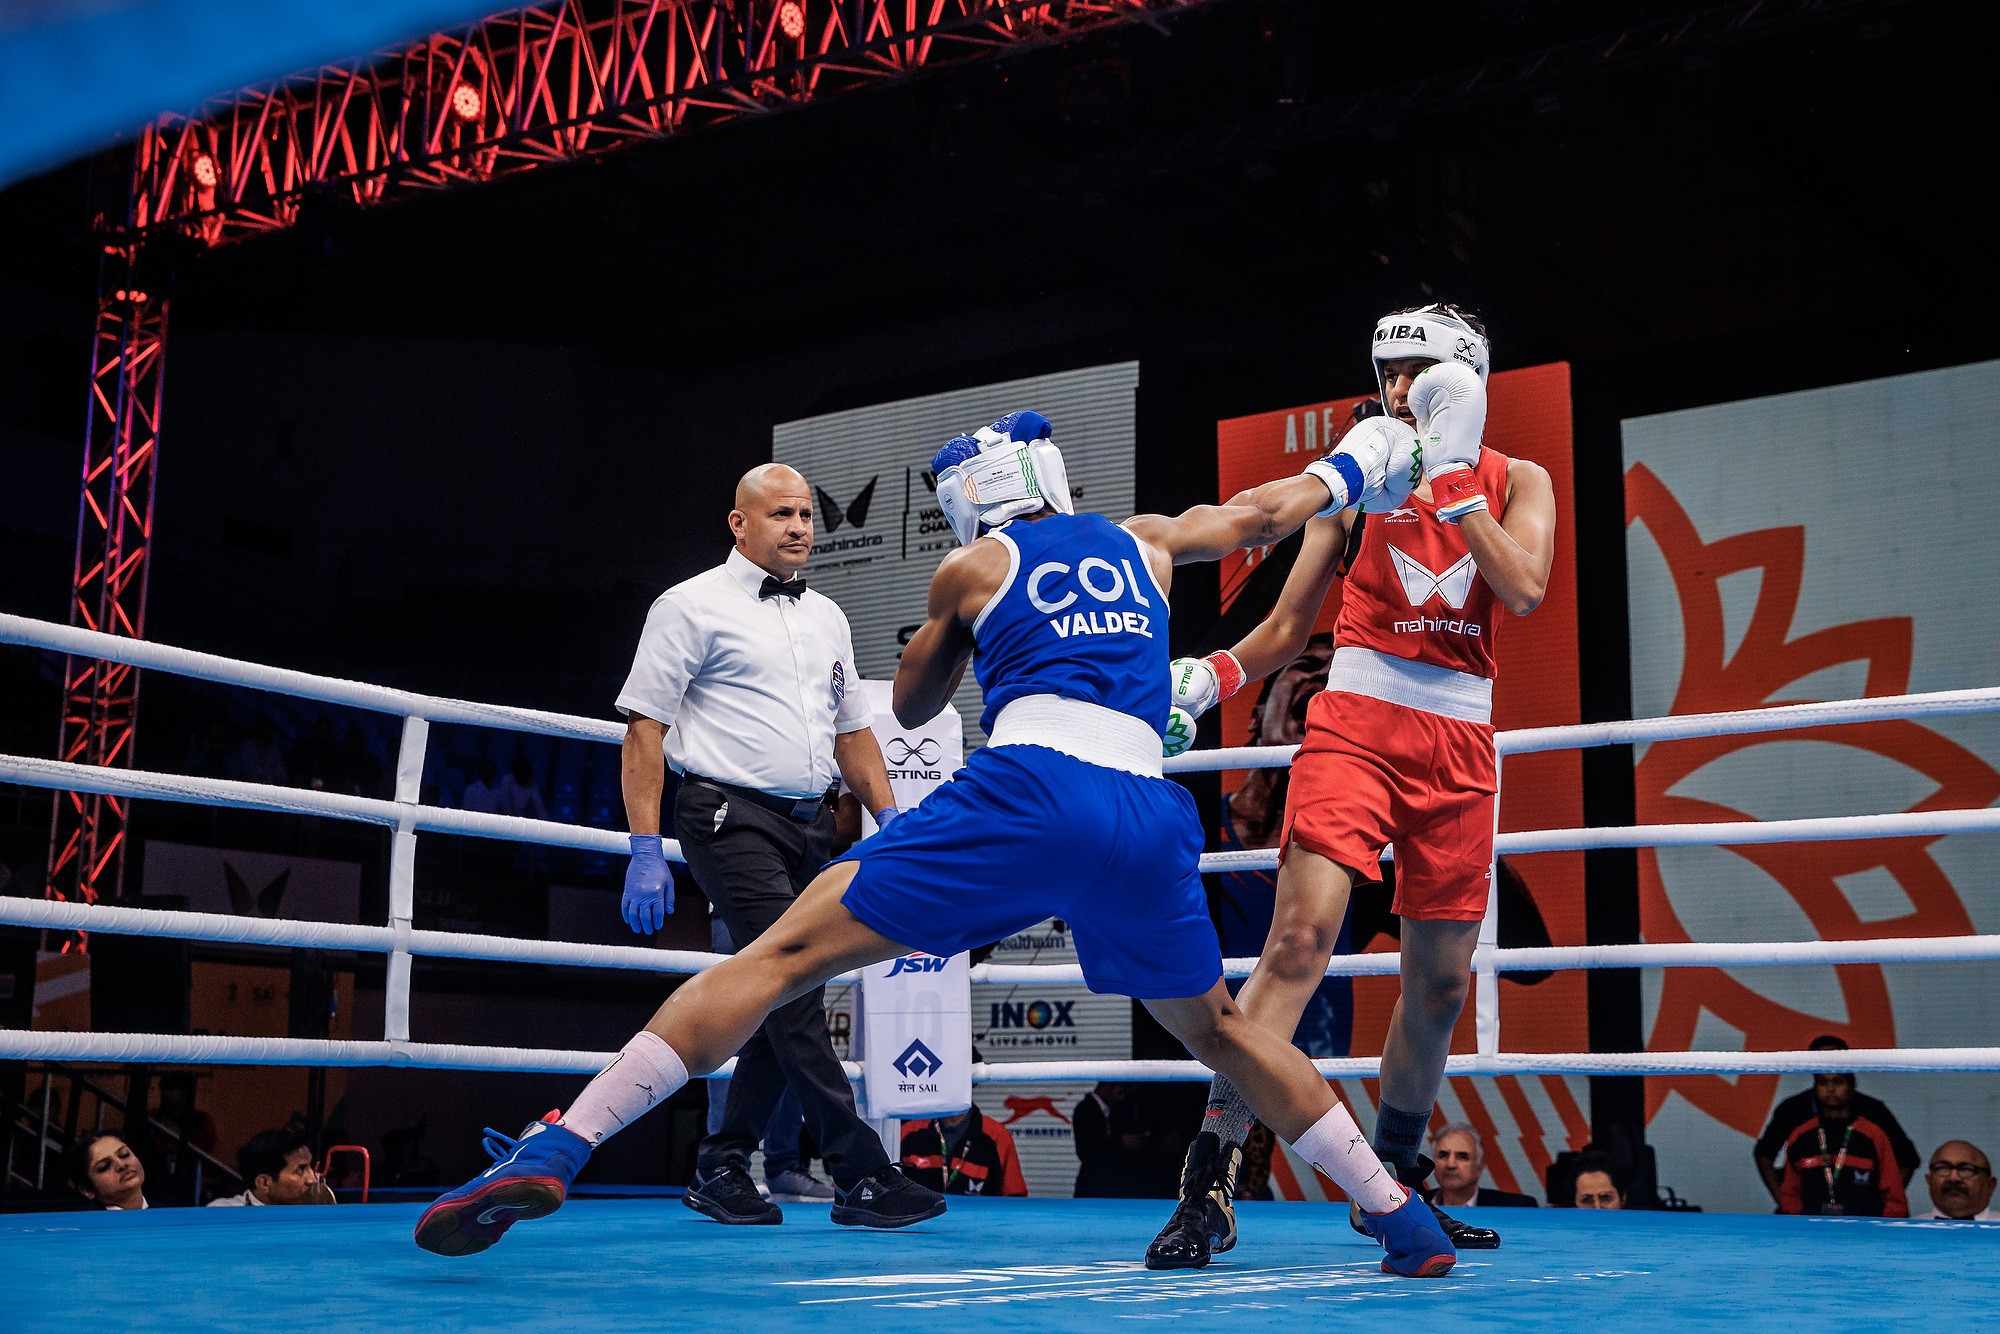 Colombia’s Angie Paola Valdés backed up her win over France's Olympic champion Estelle Mossely by beating home favourite Jasmine Lamboria ©IBA